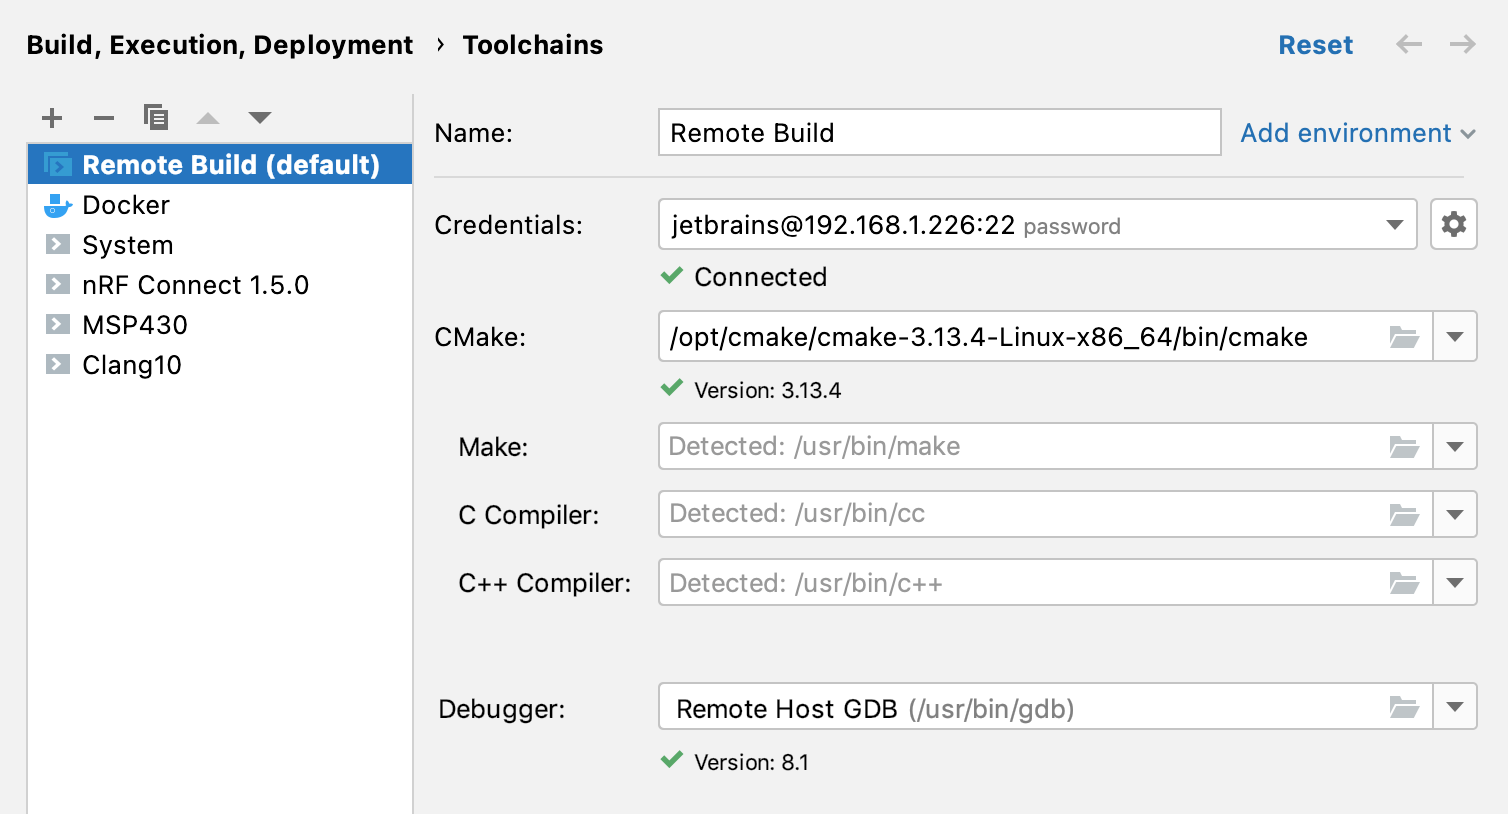 Remote toolchain for build